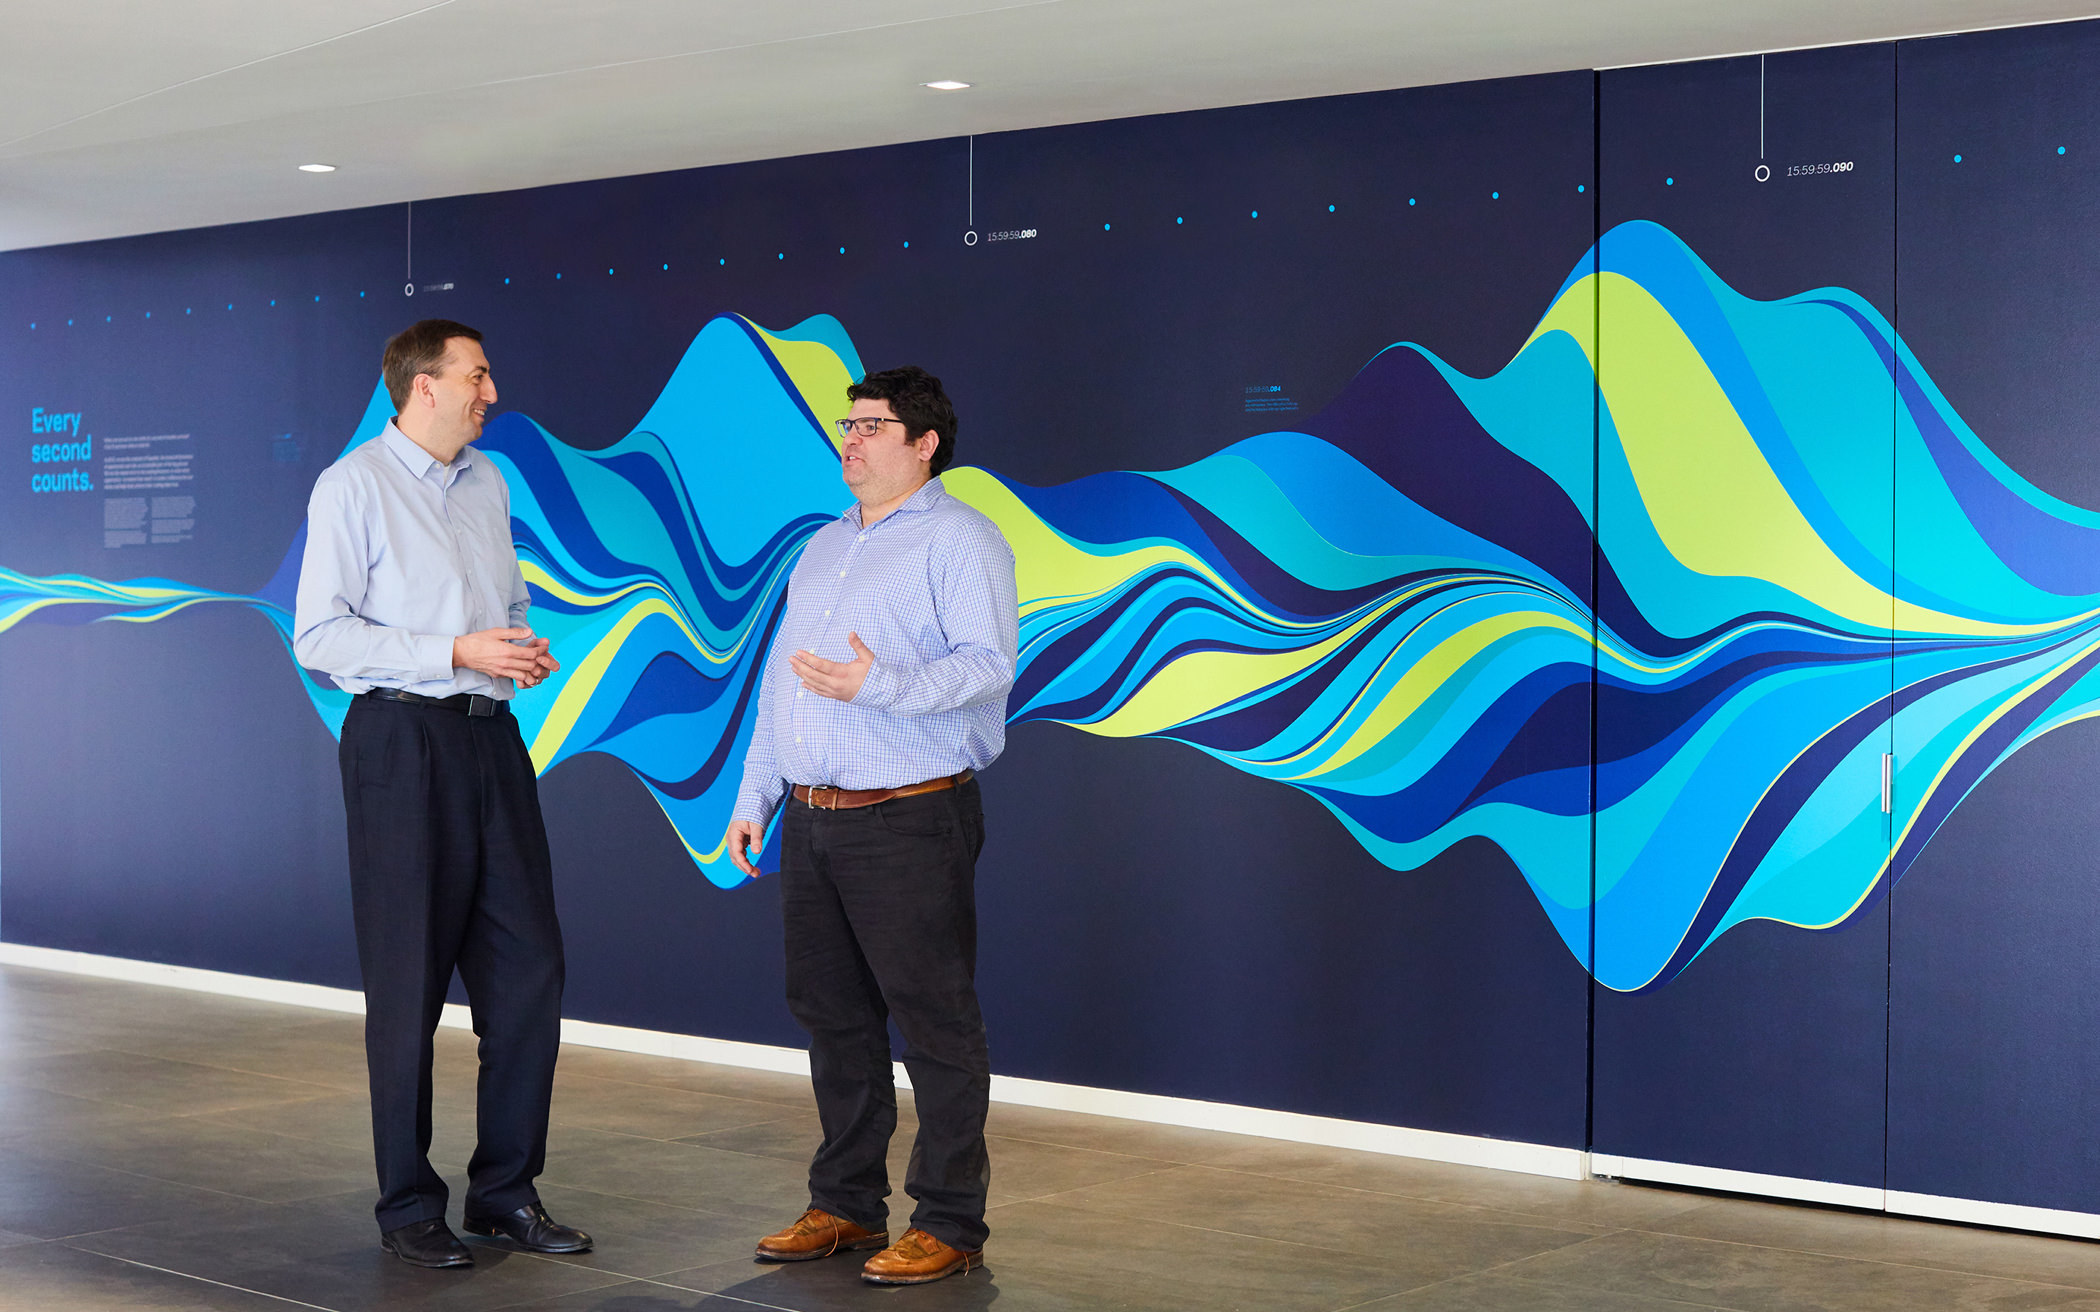 Two KCG employees stand in front of a multi-colored wave pattern mural that depicts one second of market trading activity.